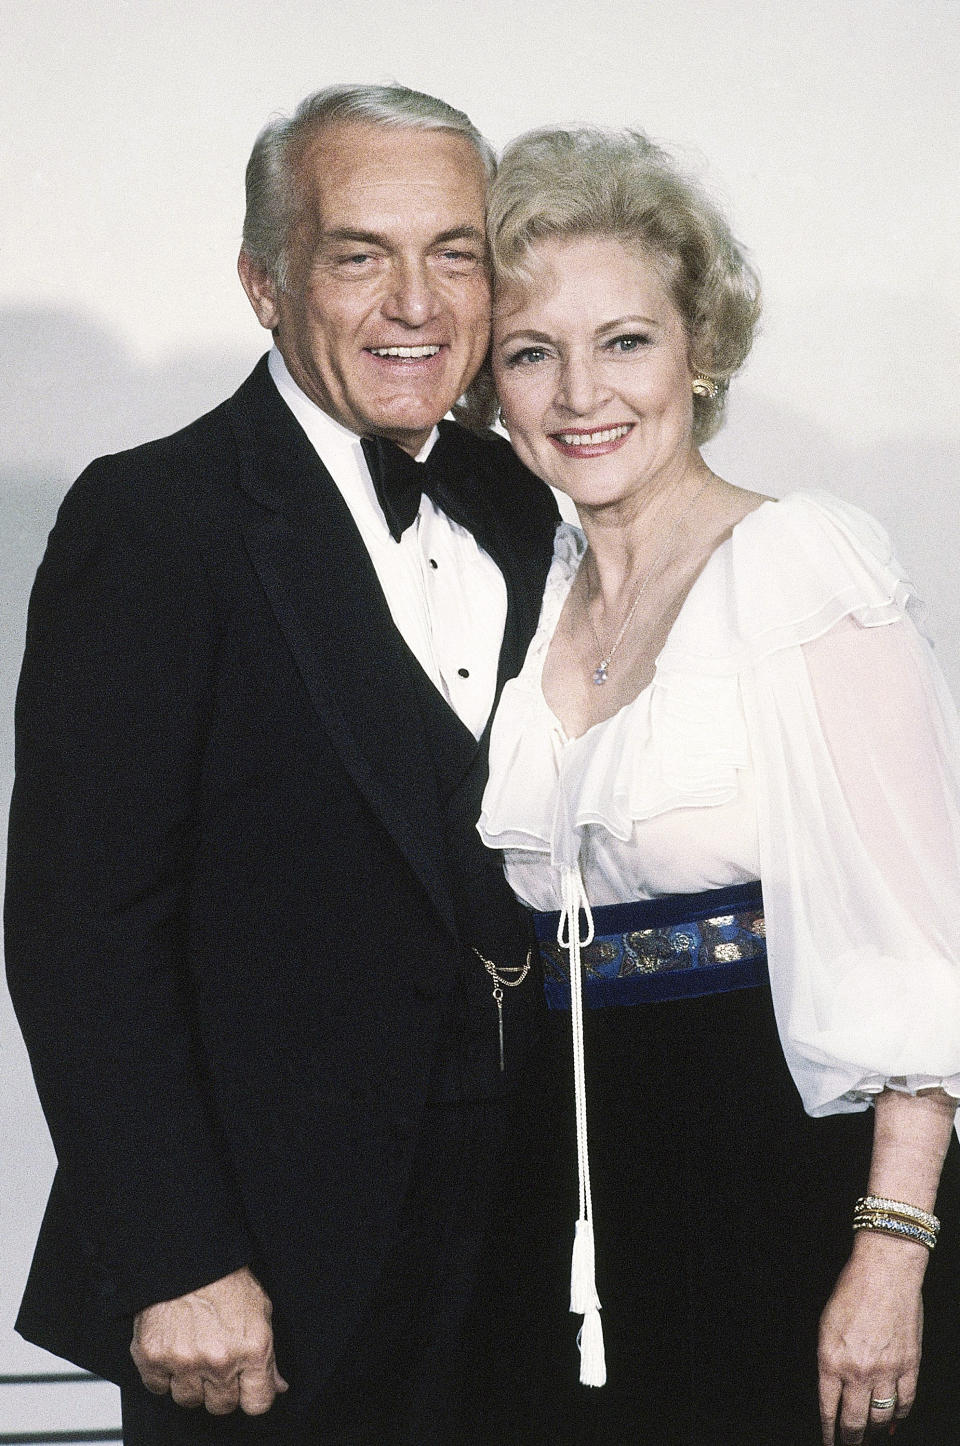 FILE - Actress Betty White stands with Ted Knight at the Emmy Awards in Los Angeles on Sept. 13, 1981. Betty White, whose saucy, up-for-anything charm made her a television mainstay for more than 60 years, has died. She was 99. (AP Photo/Randy Rasmussen, File)